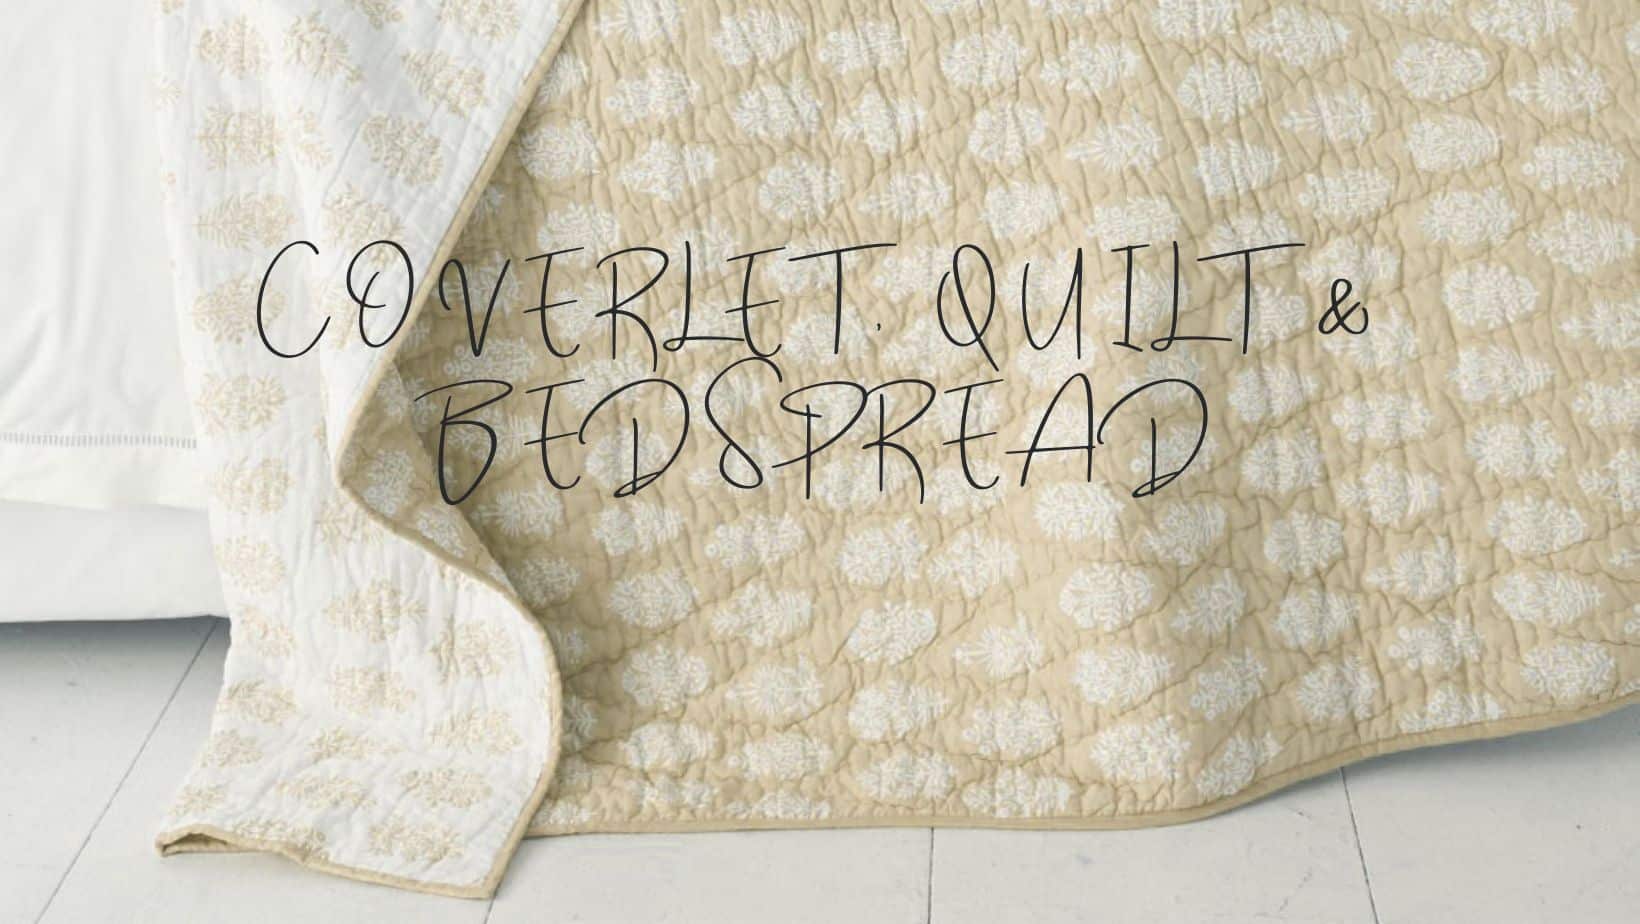 How to Select Coverlet, Quilt & Bedspread?